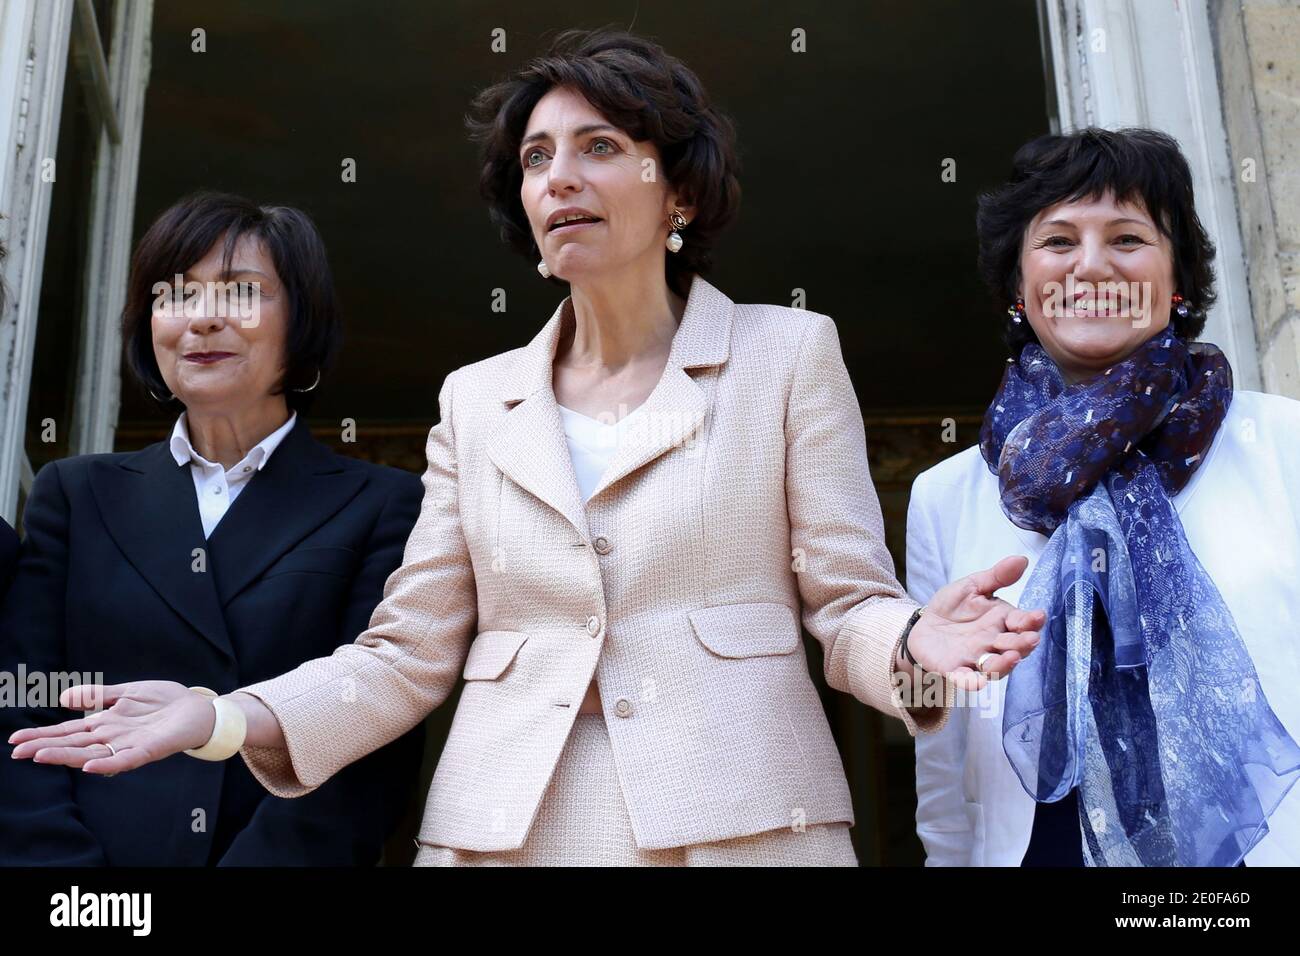 French newly appointed Social Affairs and Health Minister Marisol Touraine flanked Junior Minister for Disabled People Marie-Arlette Carlotti (L) and French Junior Minister for Family Dominique Bertinotti (R), addresses journalists upon her arrival at the Health Ministry in Paris to attend the official handover ceremony with her predecessor Xavier Bertrand, in Paris, France on May 17, 2012. Photo by Stephane Lemouton/ABACAPRESS.COM. Stock Photo